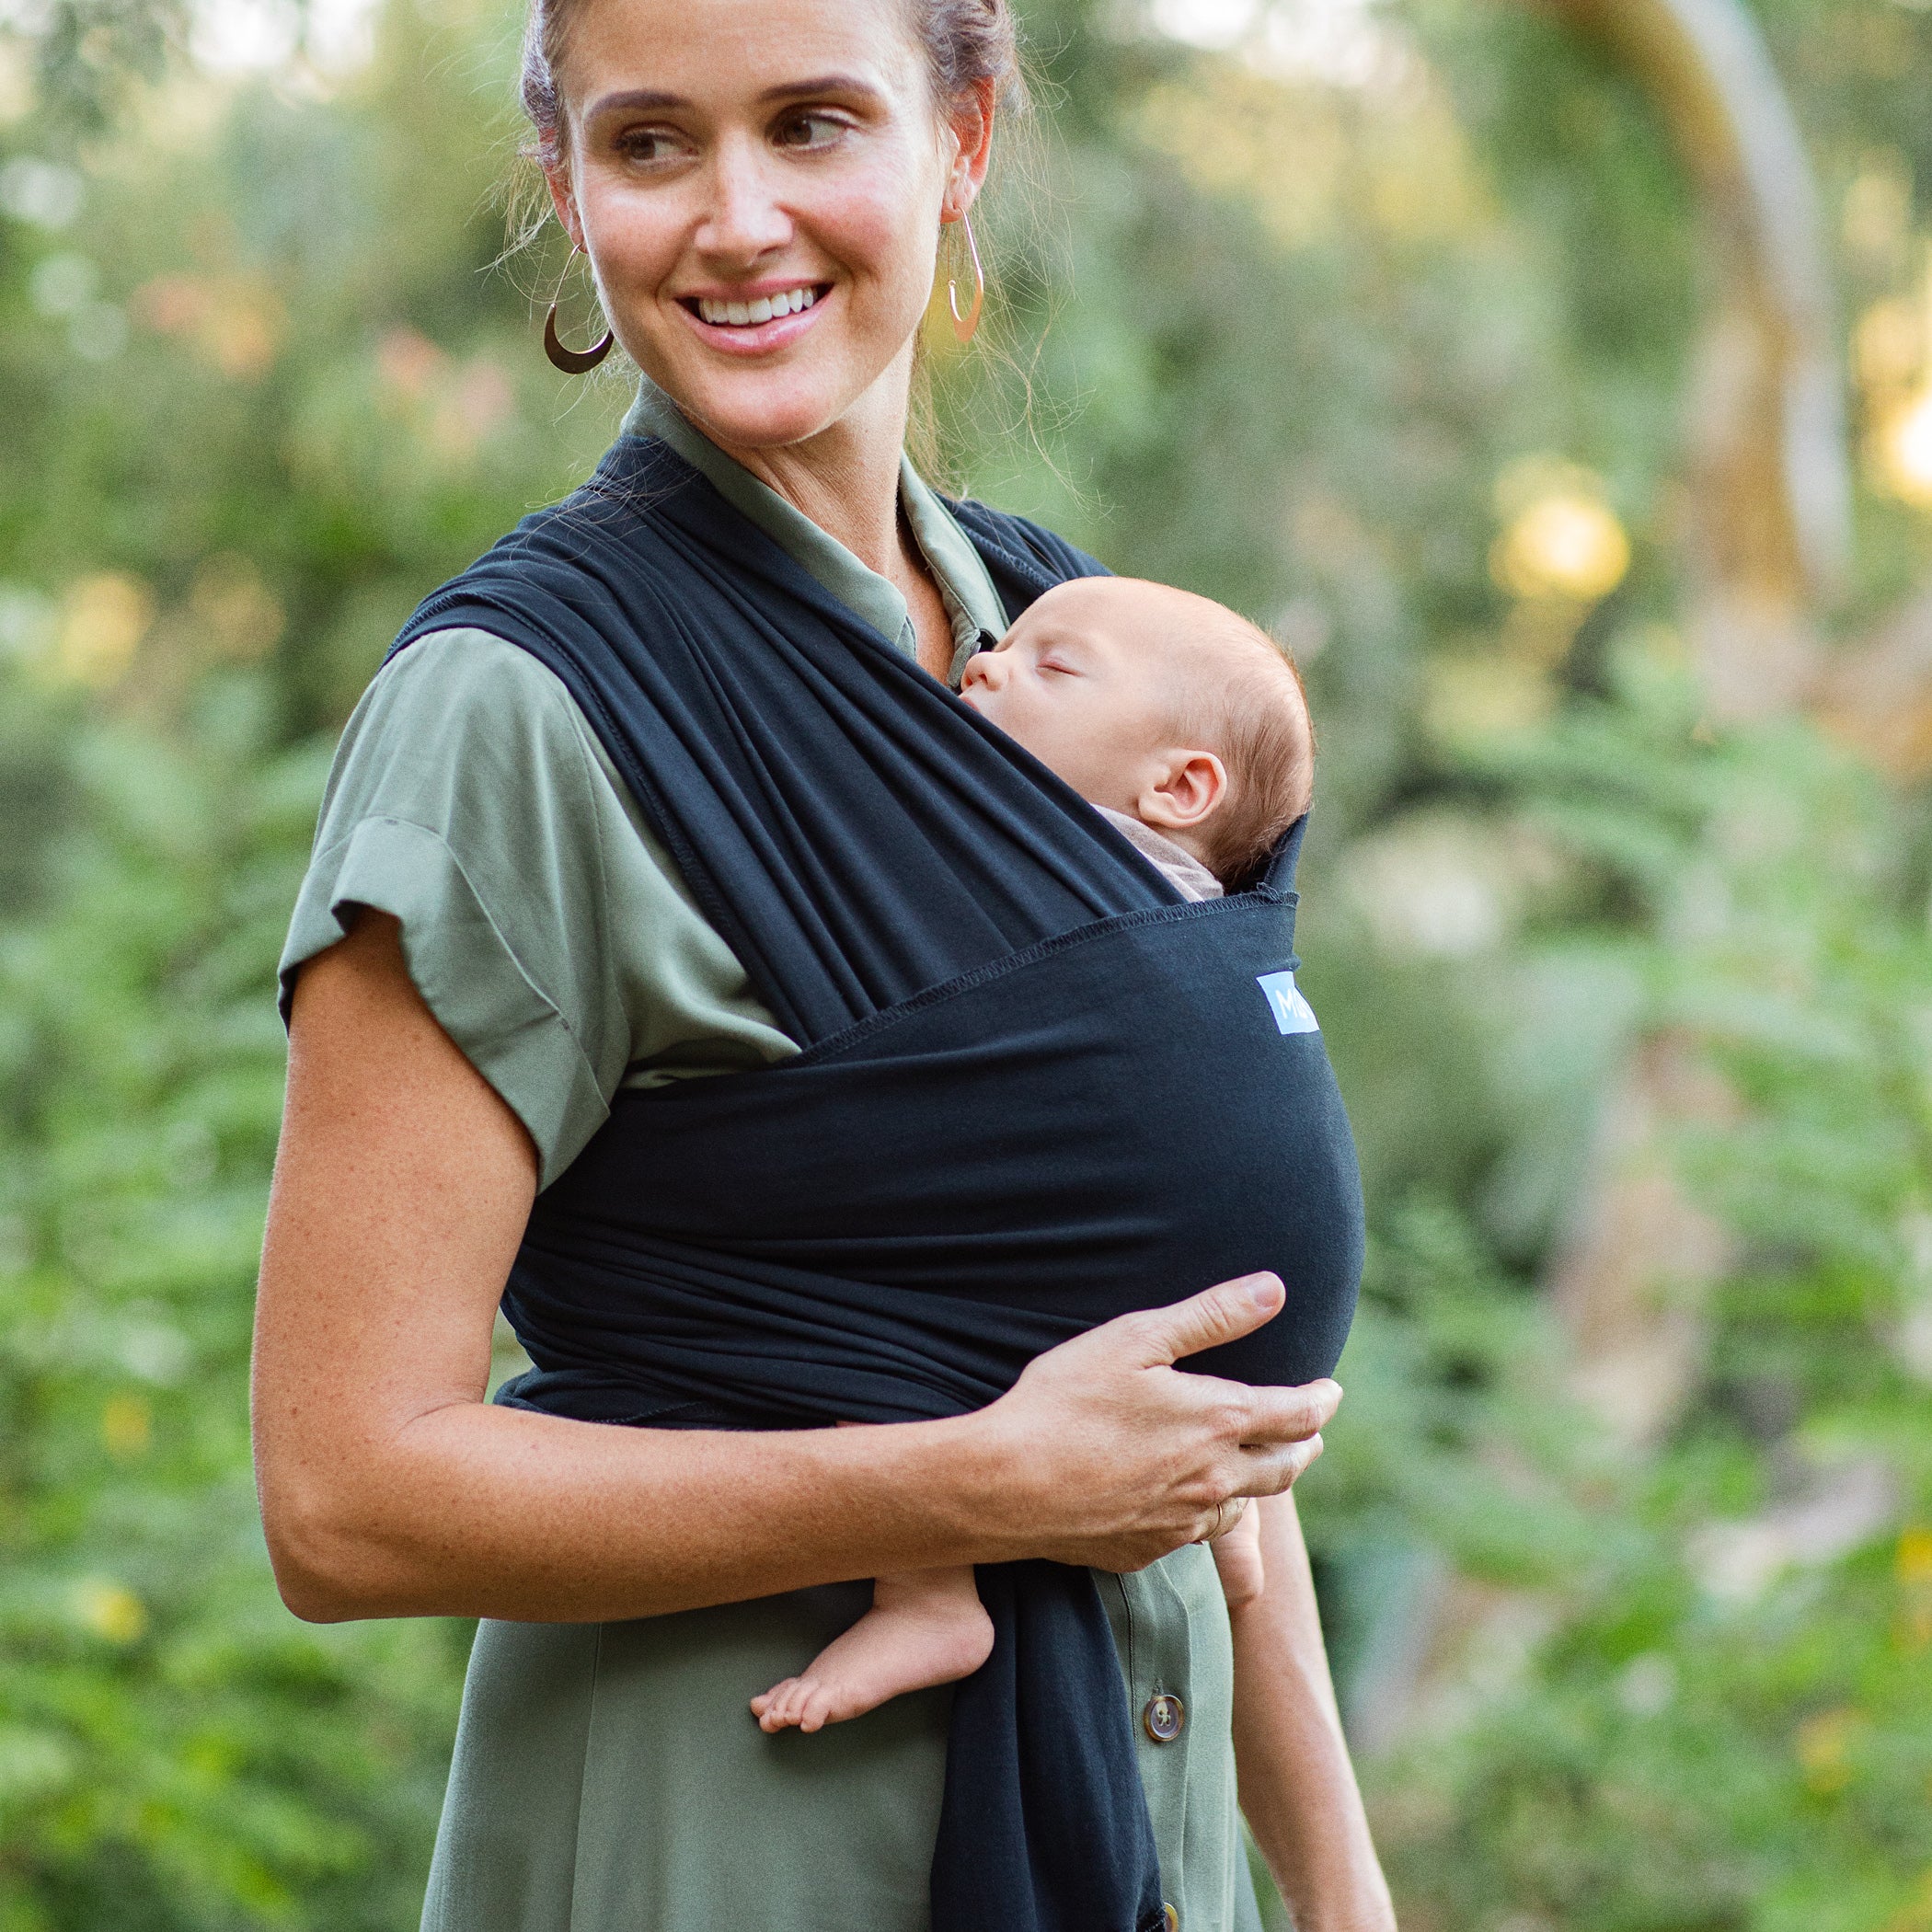 Classic Wrap Baby Carrier - Black